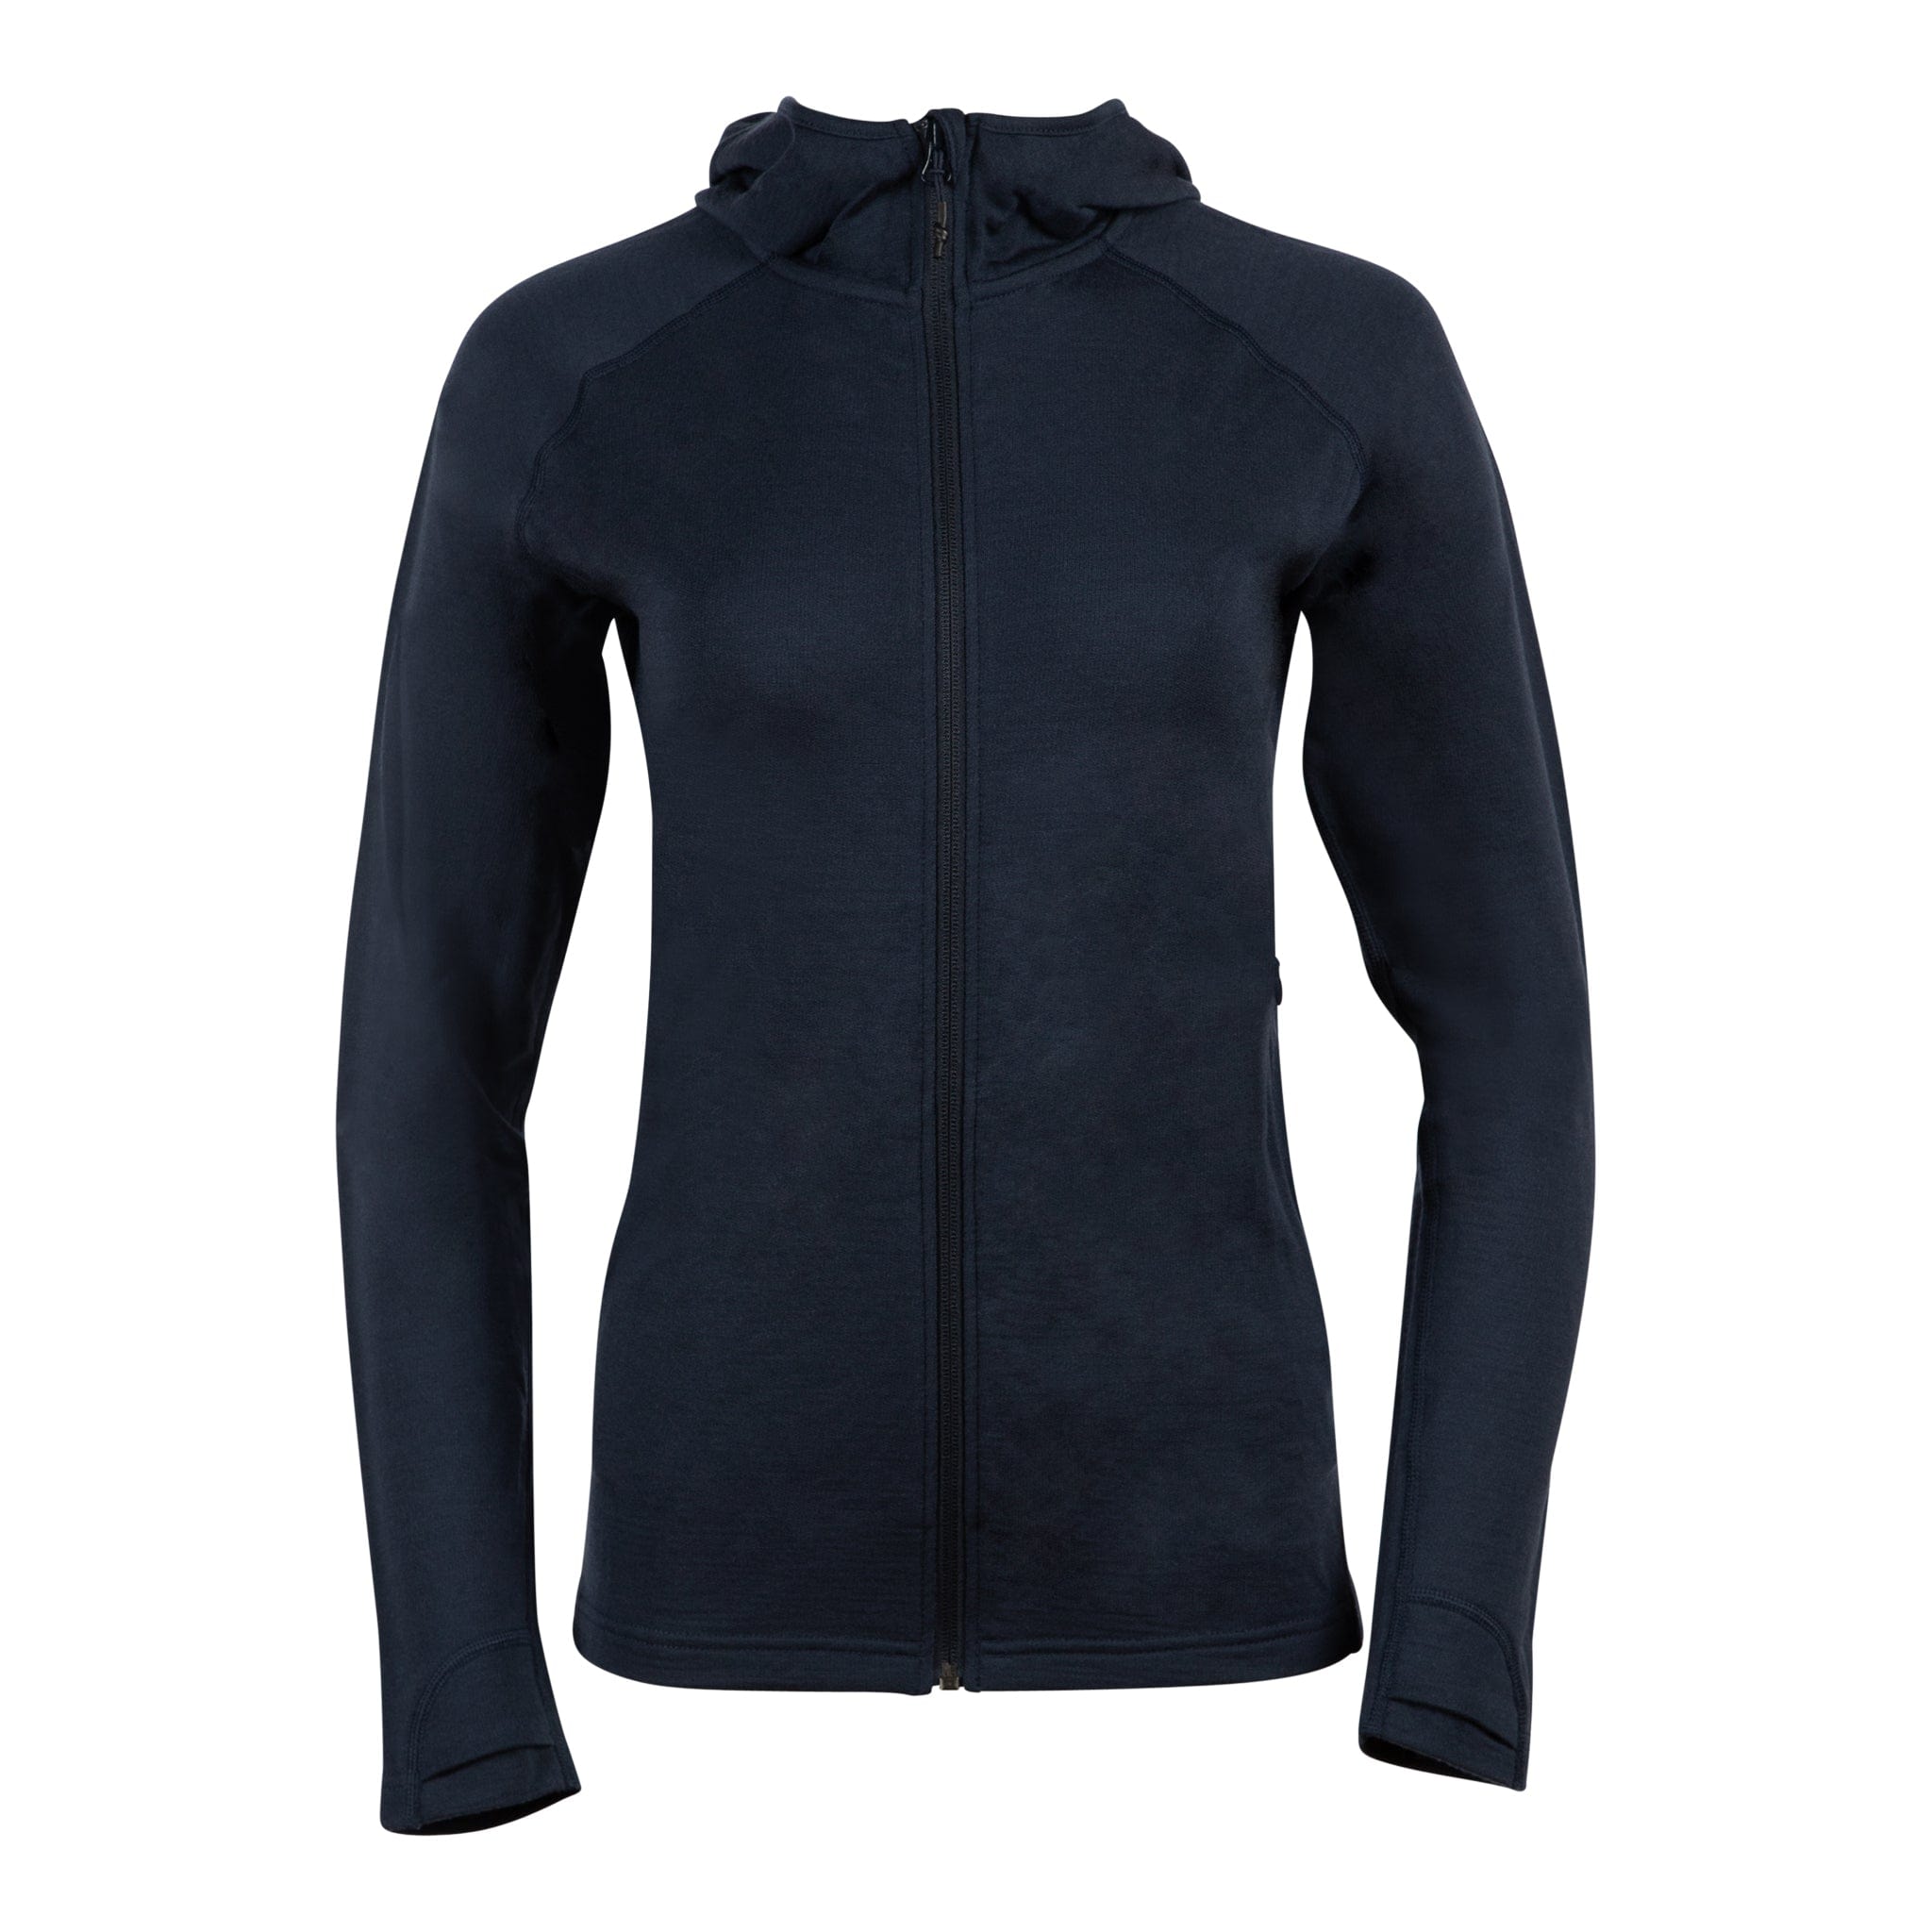 Performance Full Zip Mid Layer - Charcoal